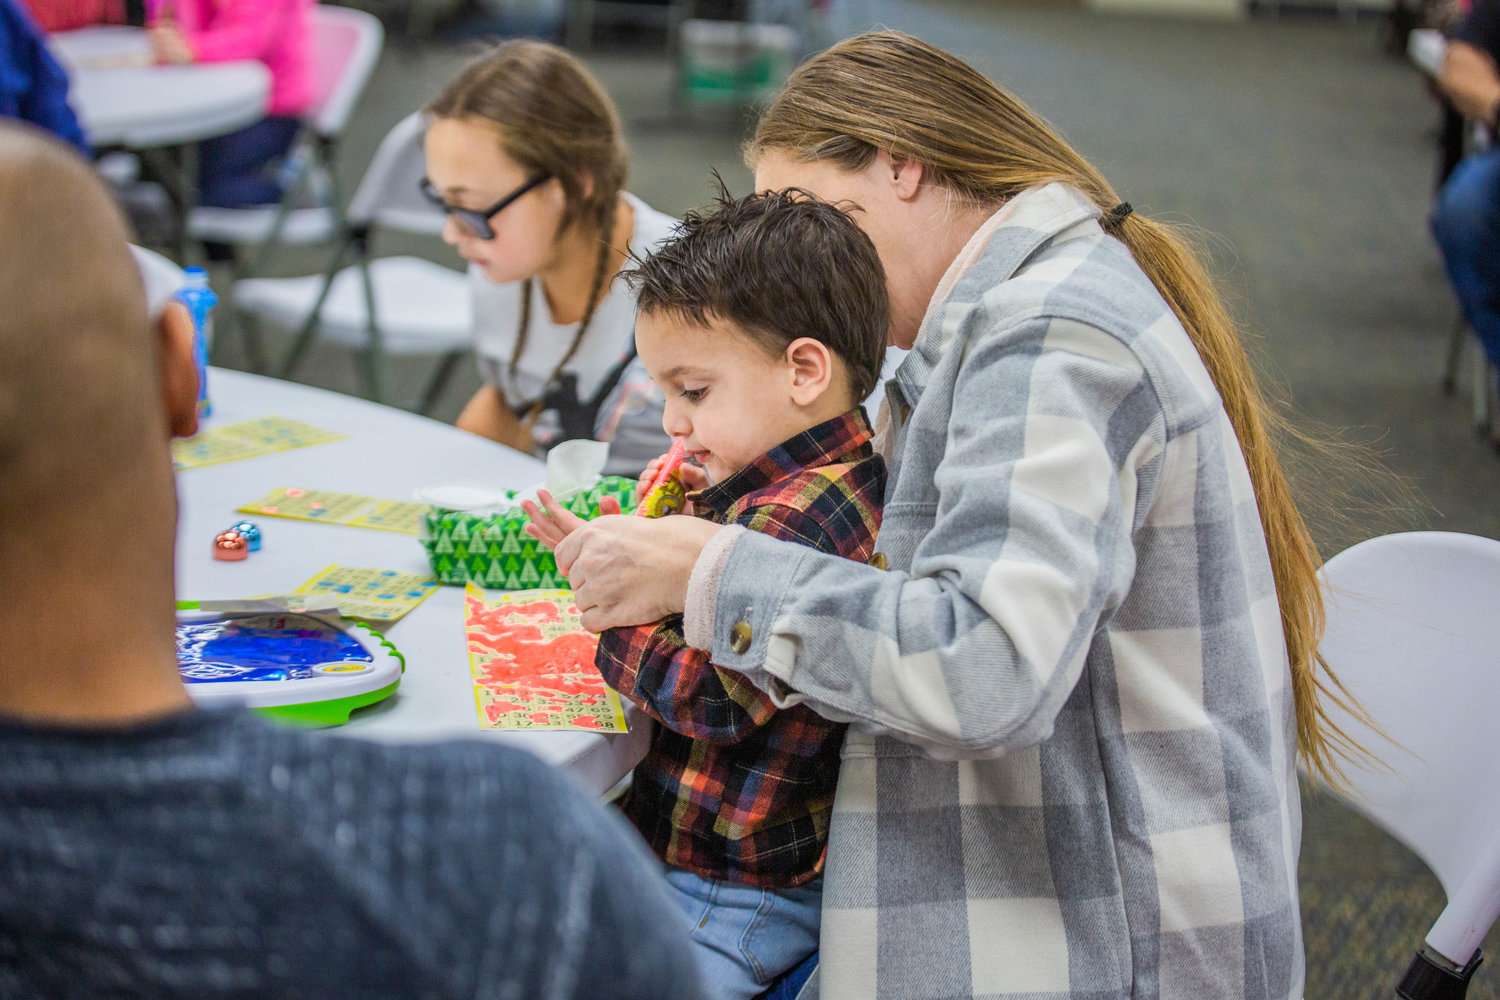 Wesley Ferrell, 2, gets bingo ink on his fingers during the Twin Cities Rotary Club Turkey Bingo in the Chehalis Eagles building on Saturday afternoon.